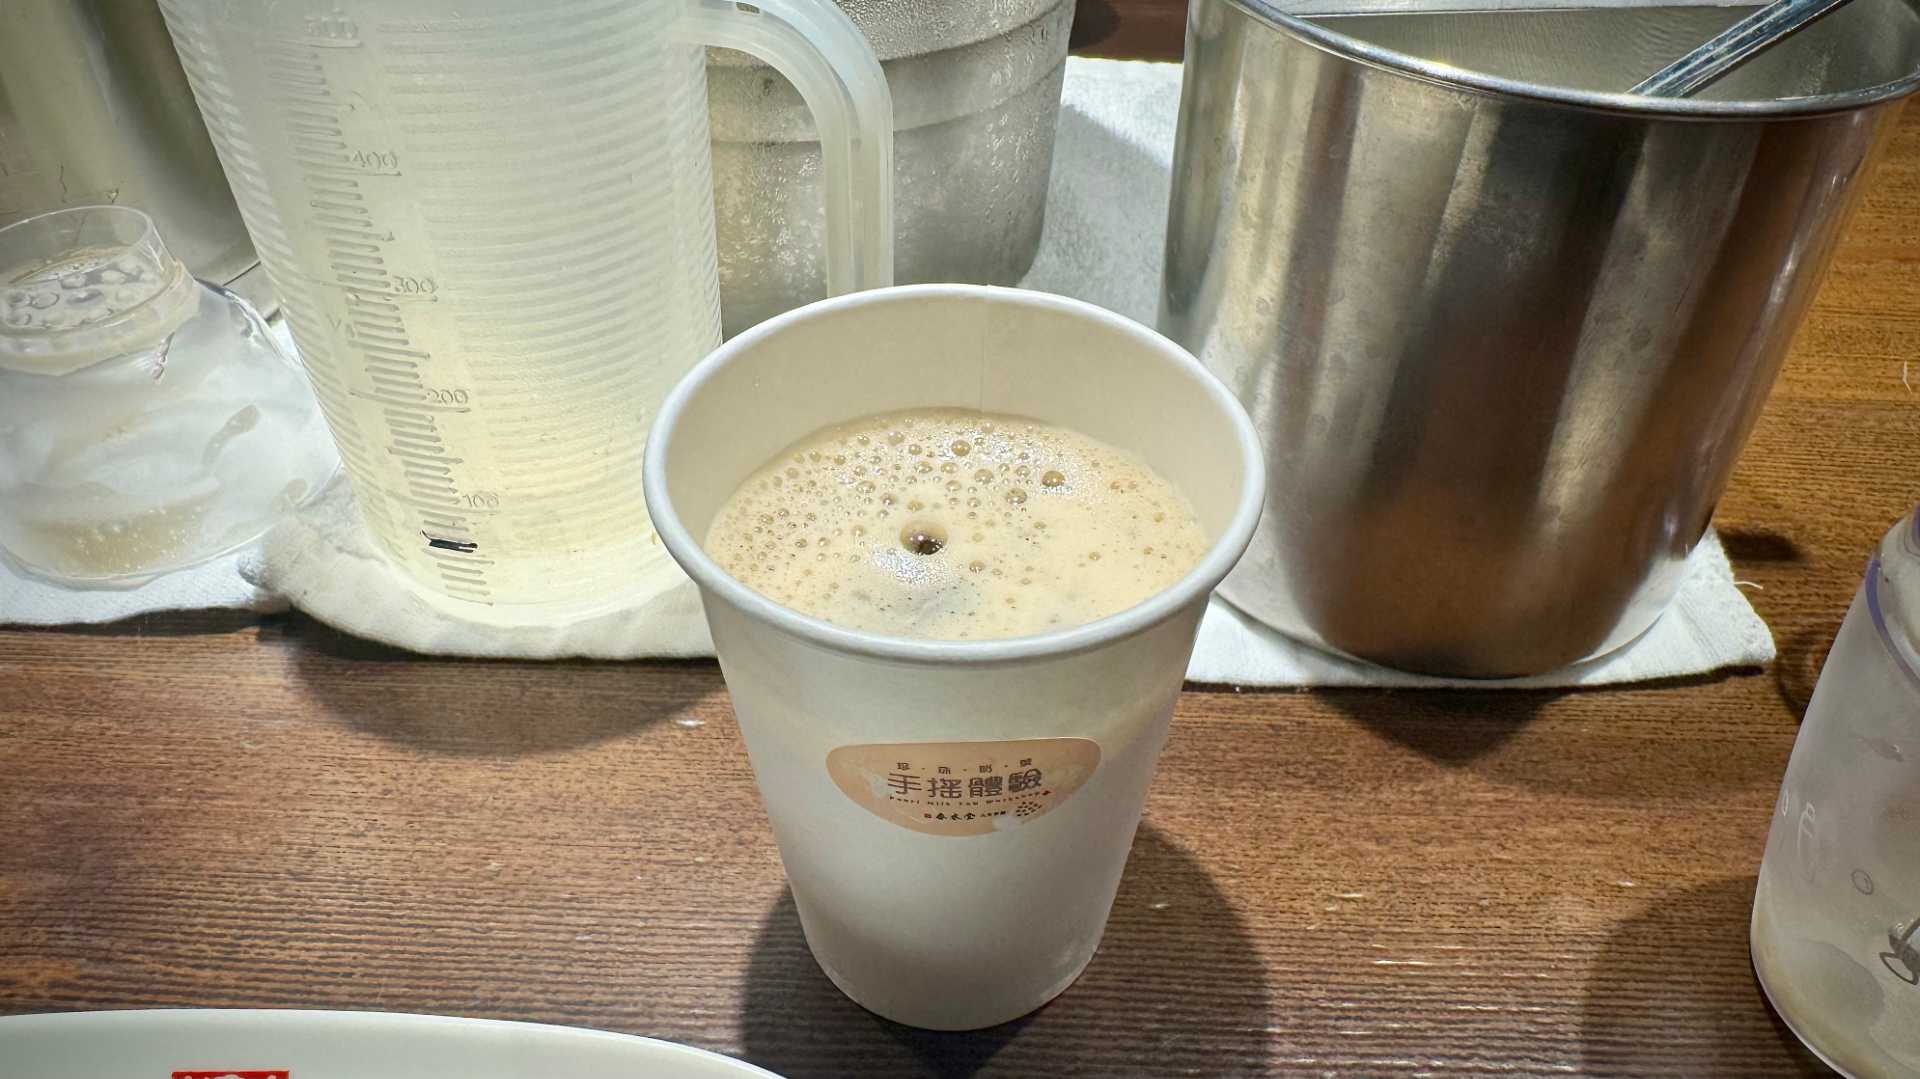 A paper cup filled with frothy black iced tea.